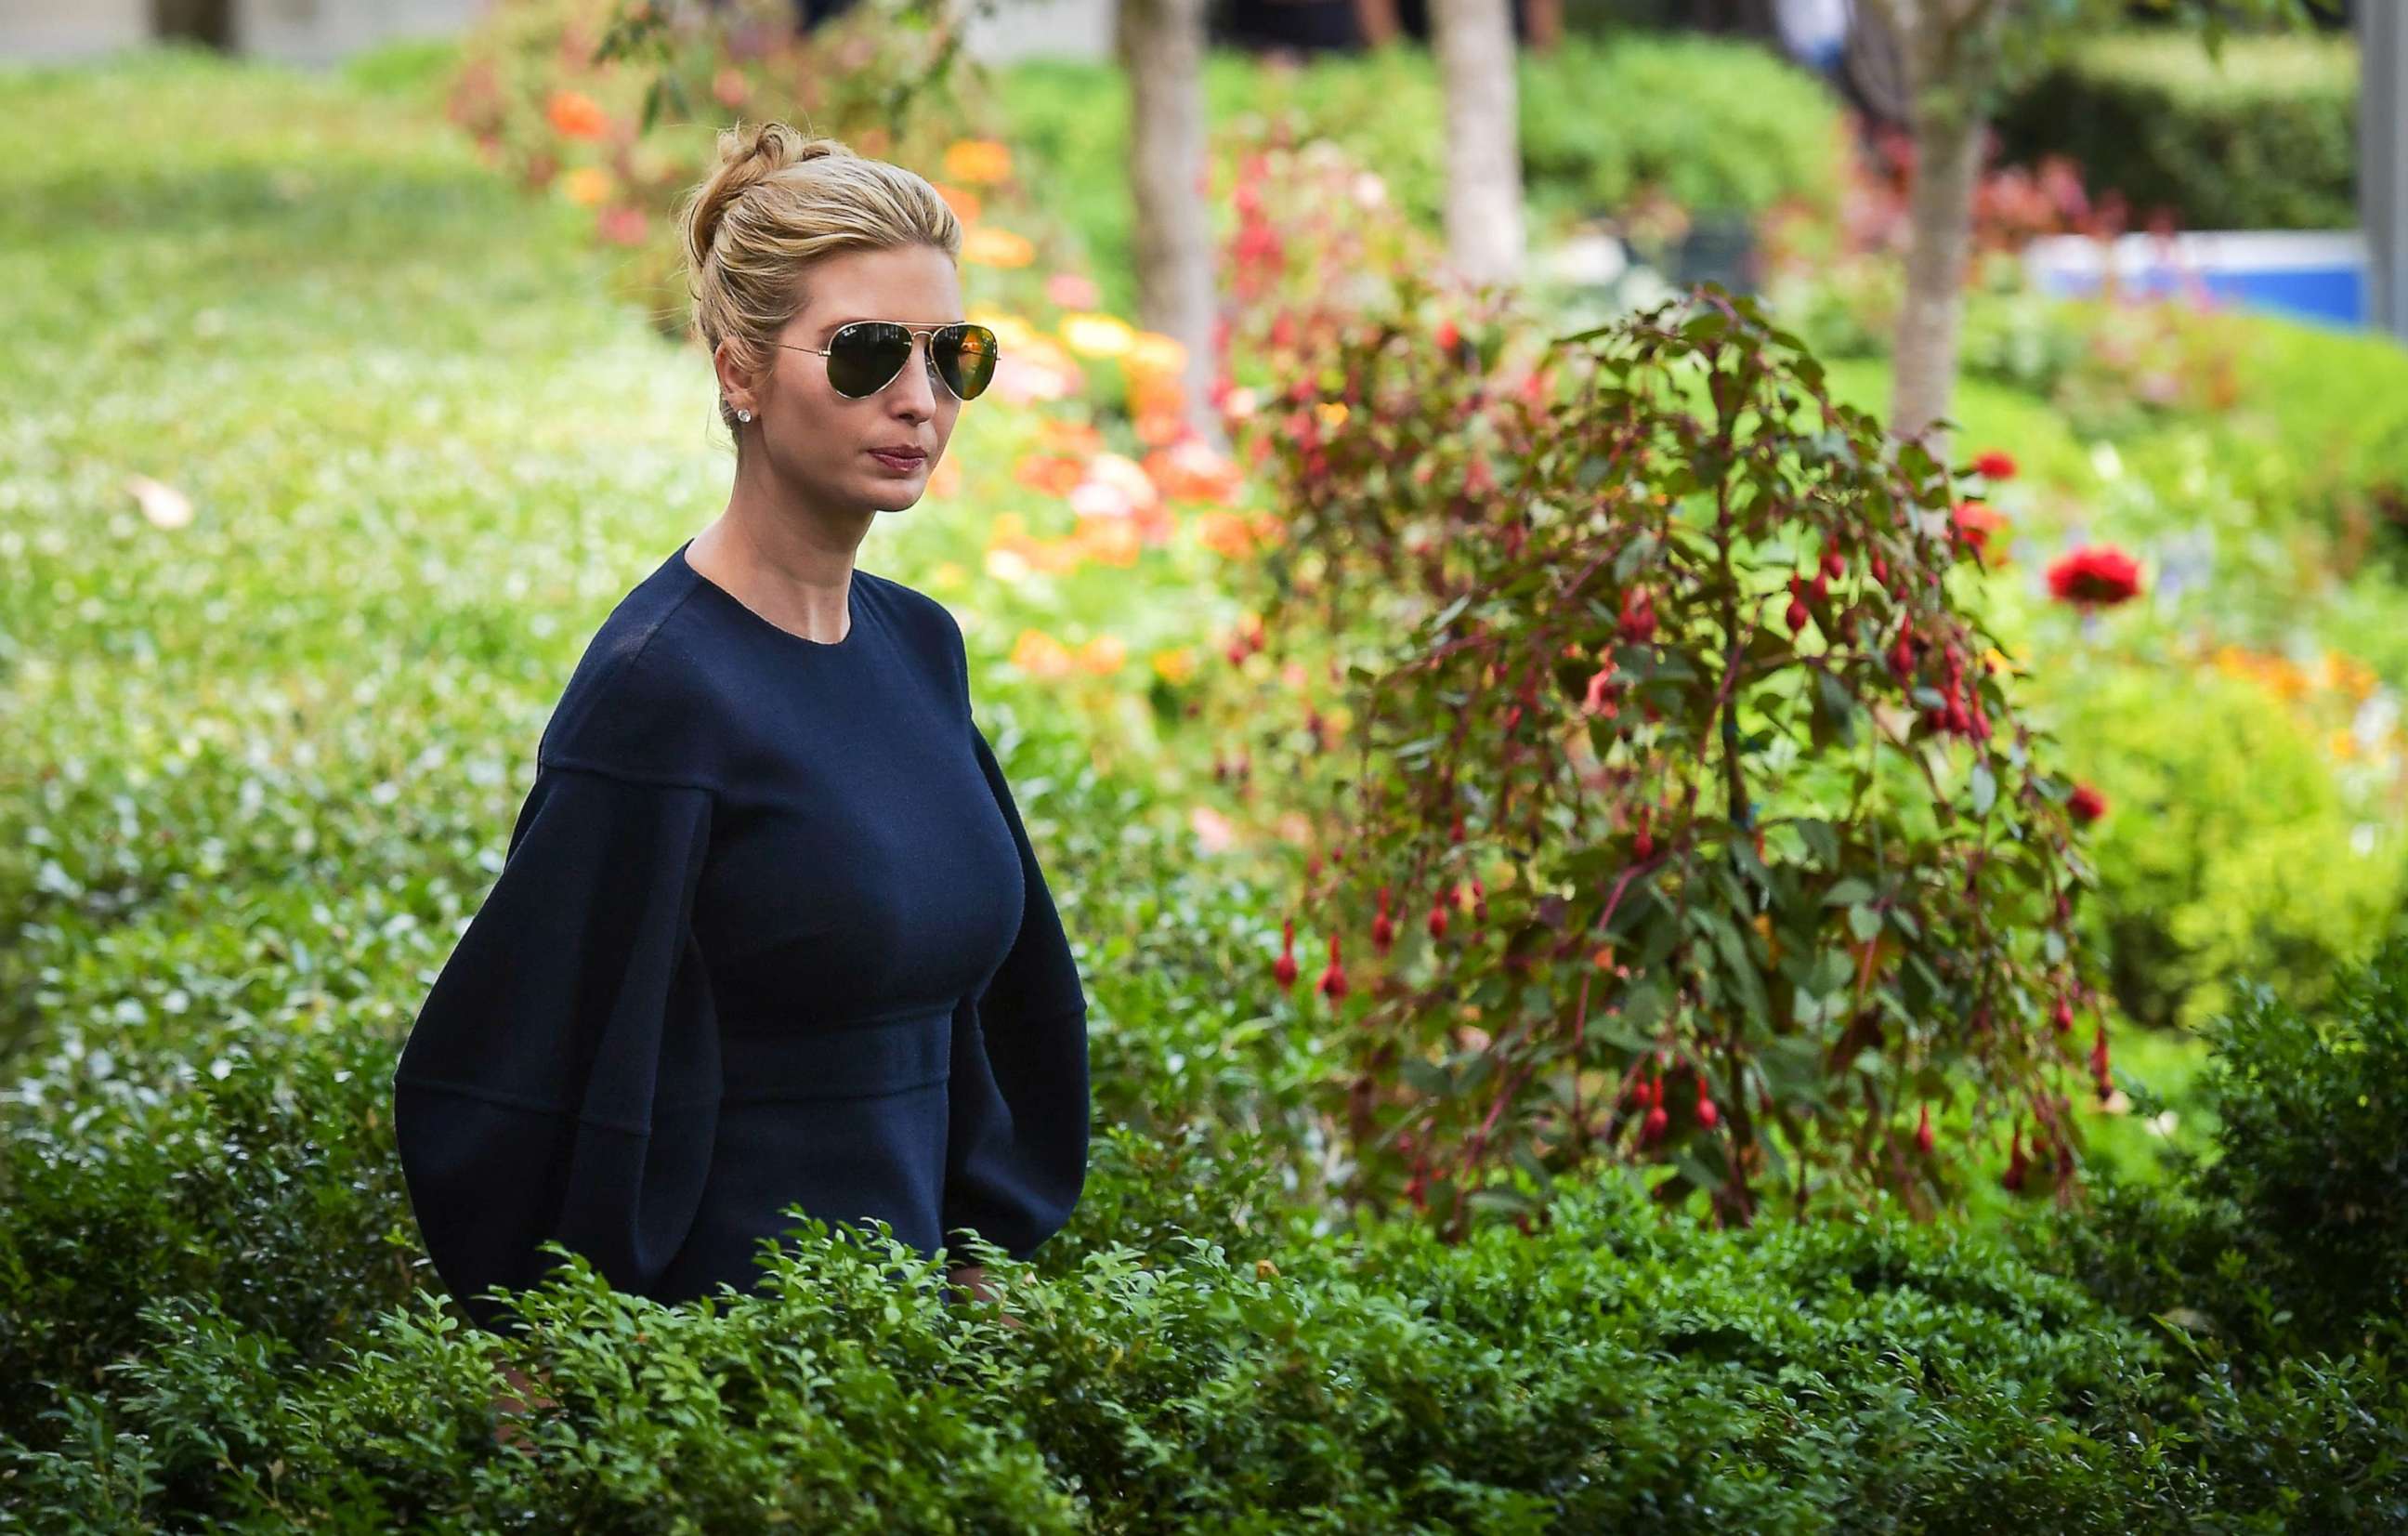 PHOTO: Ivanka Trump arrives for an event in the Rose Garden of the White House on June 7, 2018 in Washington, D.C.